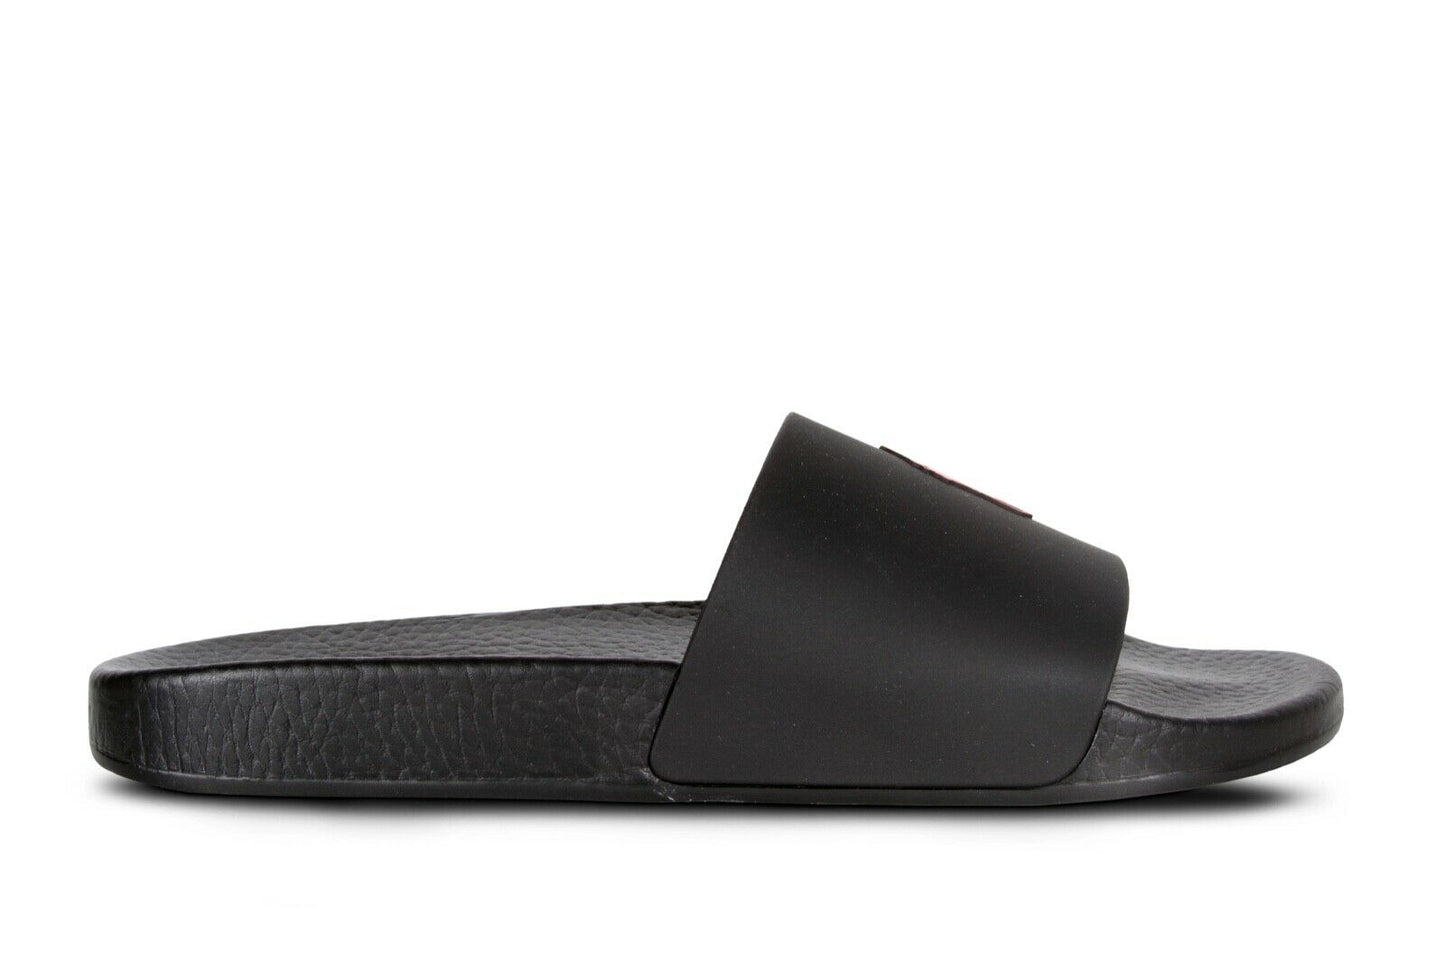 Polo Ralph Lauren Signature Pony Slide in Black and Red 809852071004